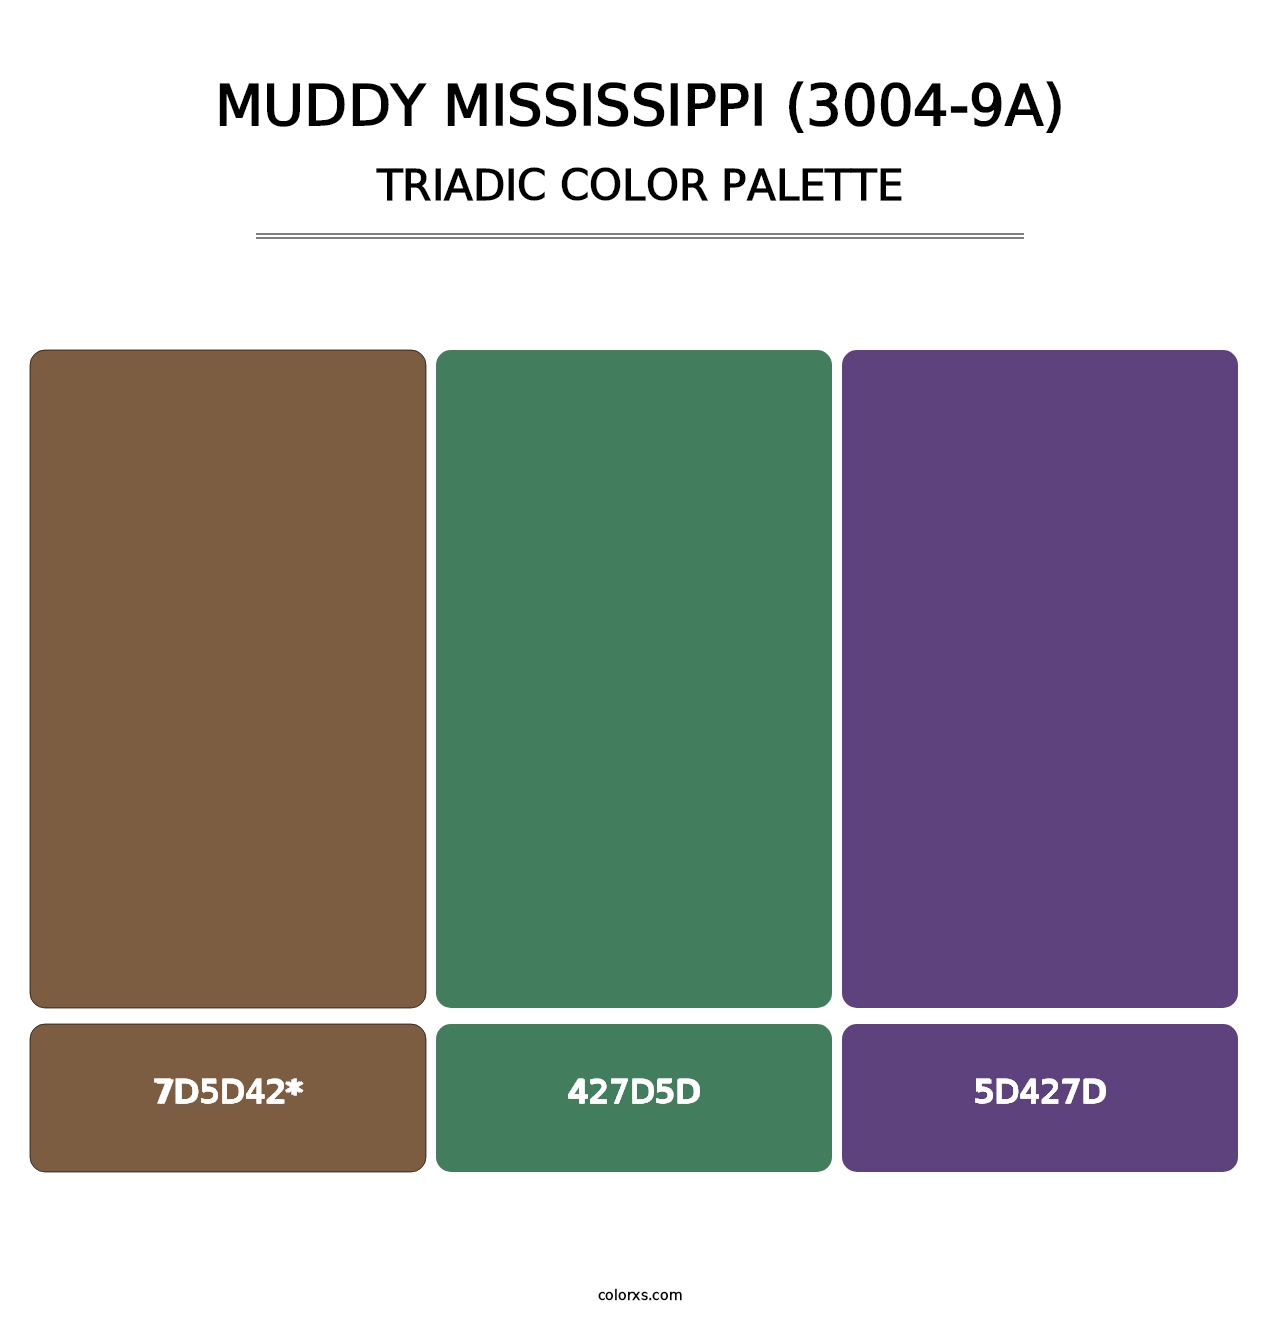 Muddy Mississippi (3004-9A) - Triadic Color Palette